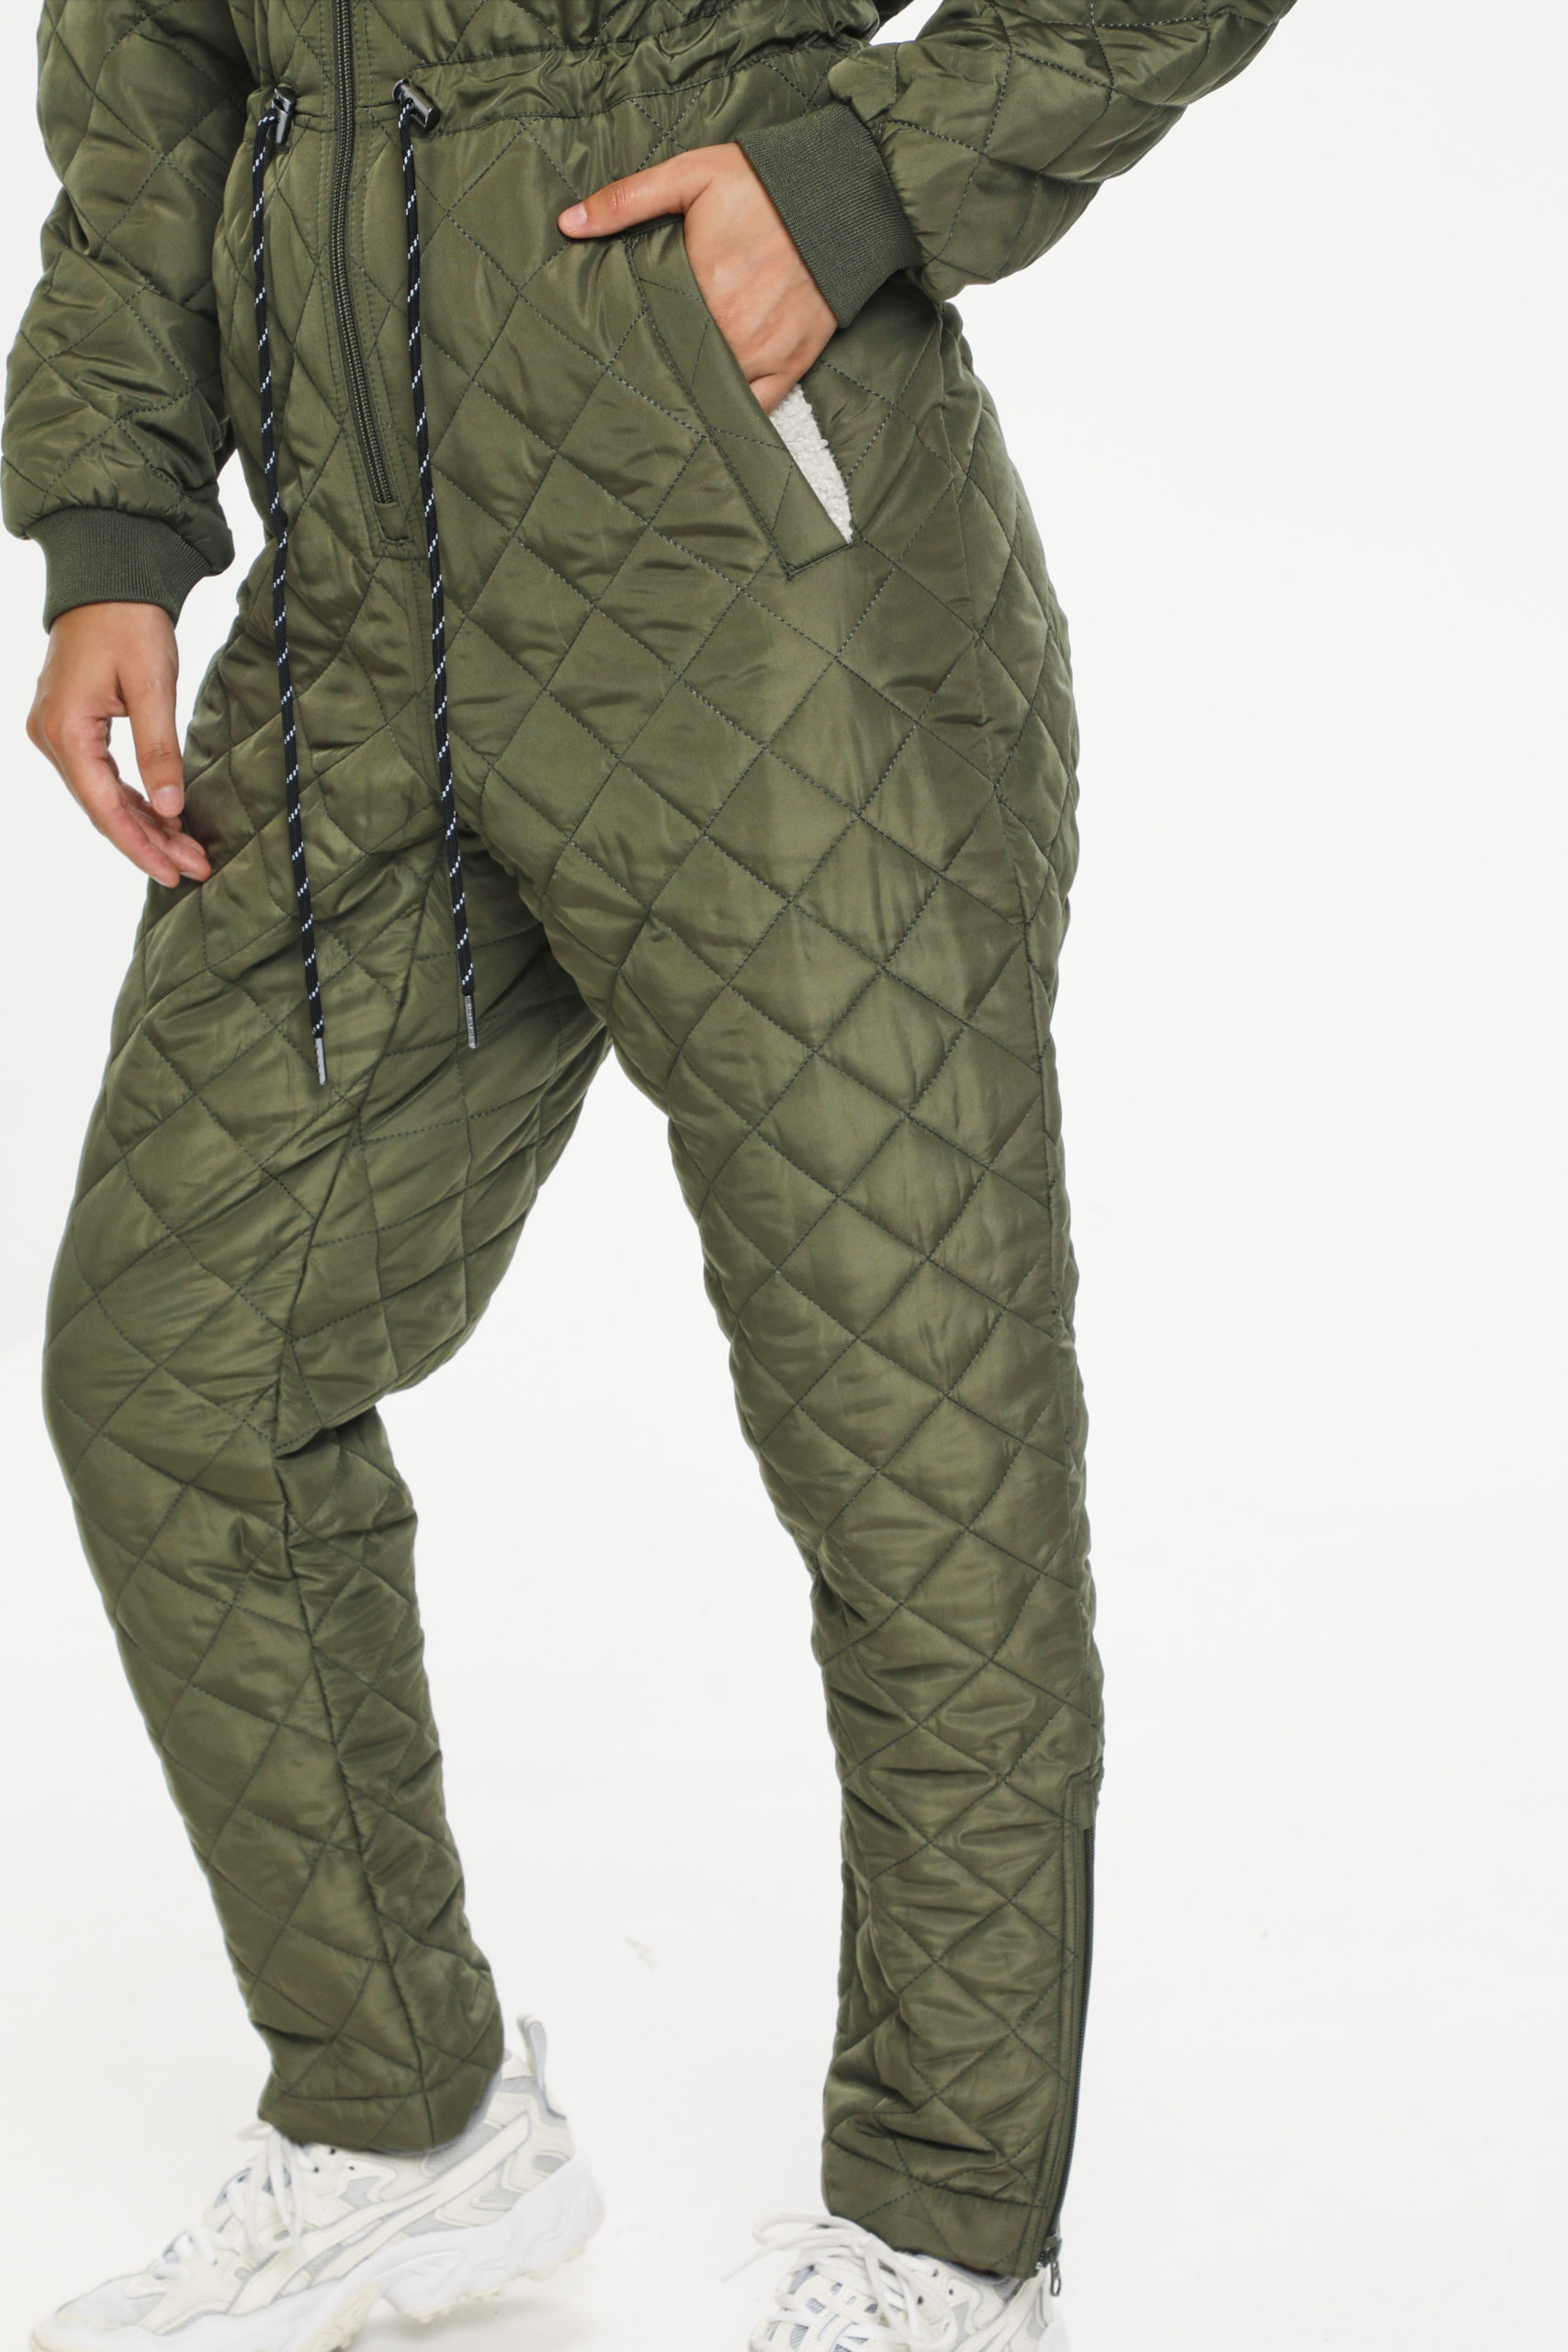 KAsorita Army Quilted Jumpsuit bottom